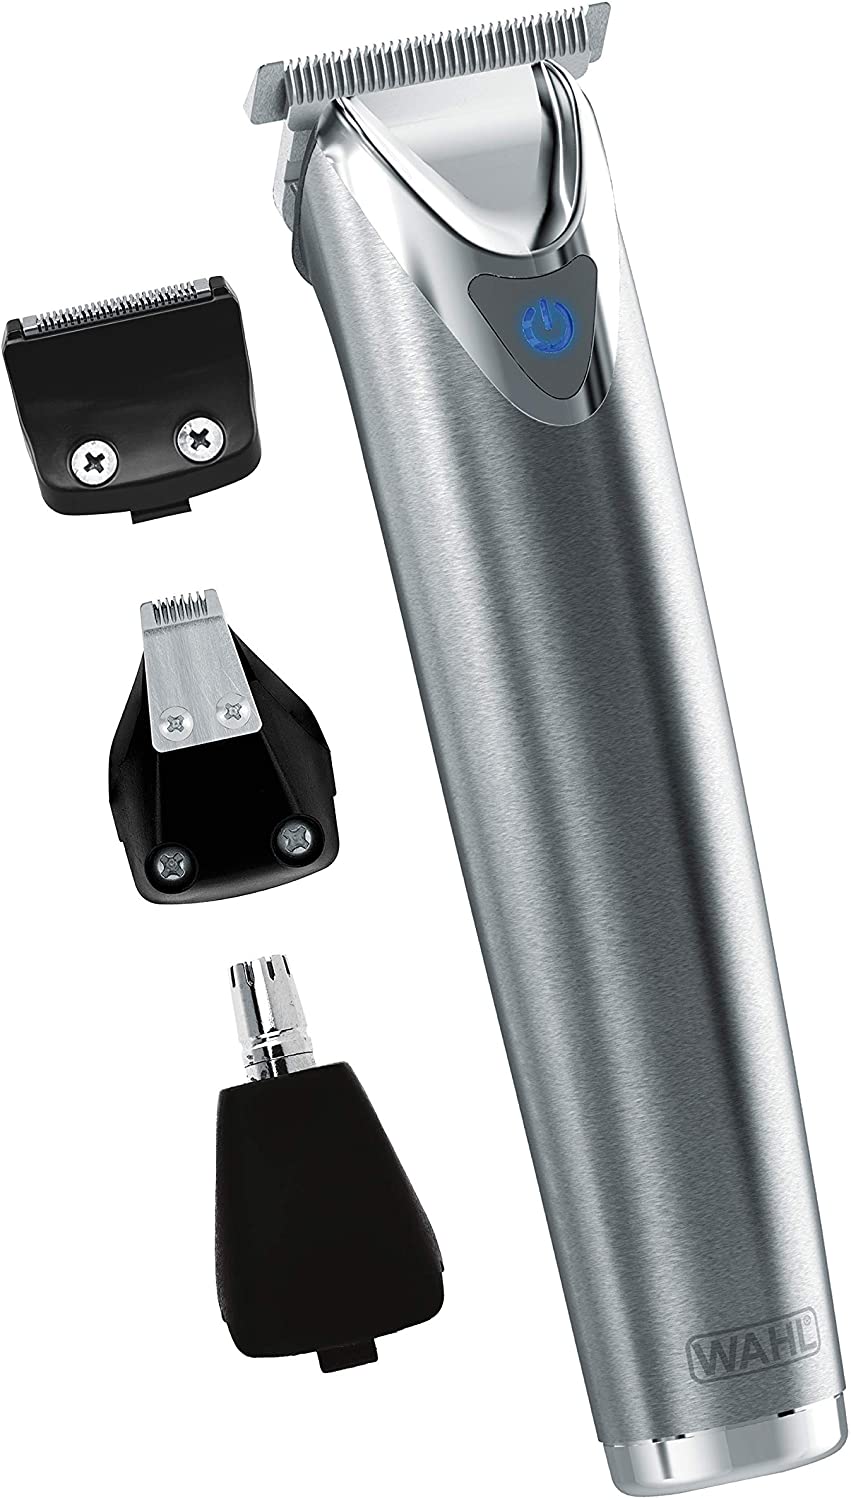 wahl 5 star electric shaver